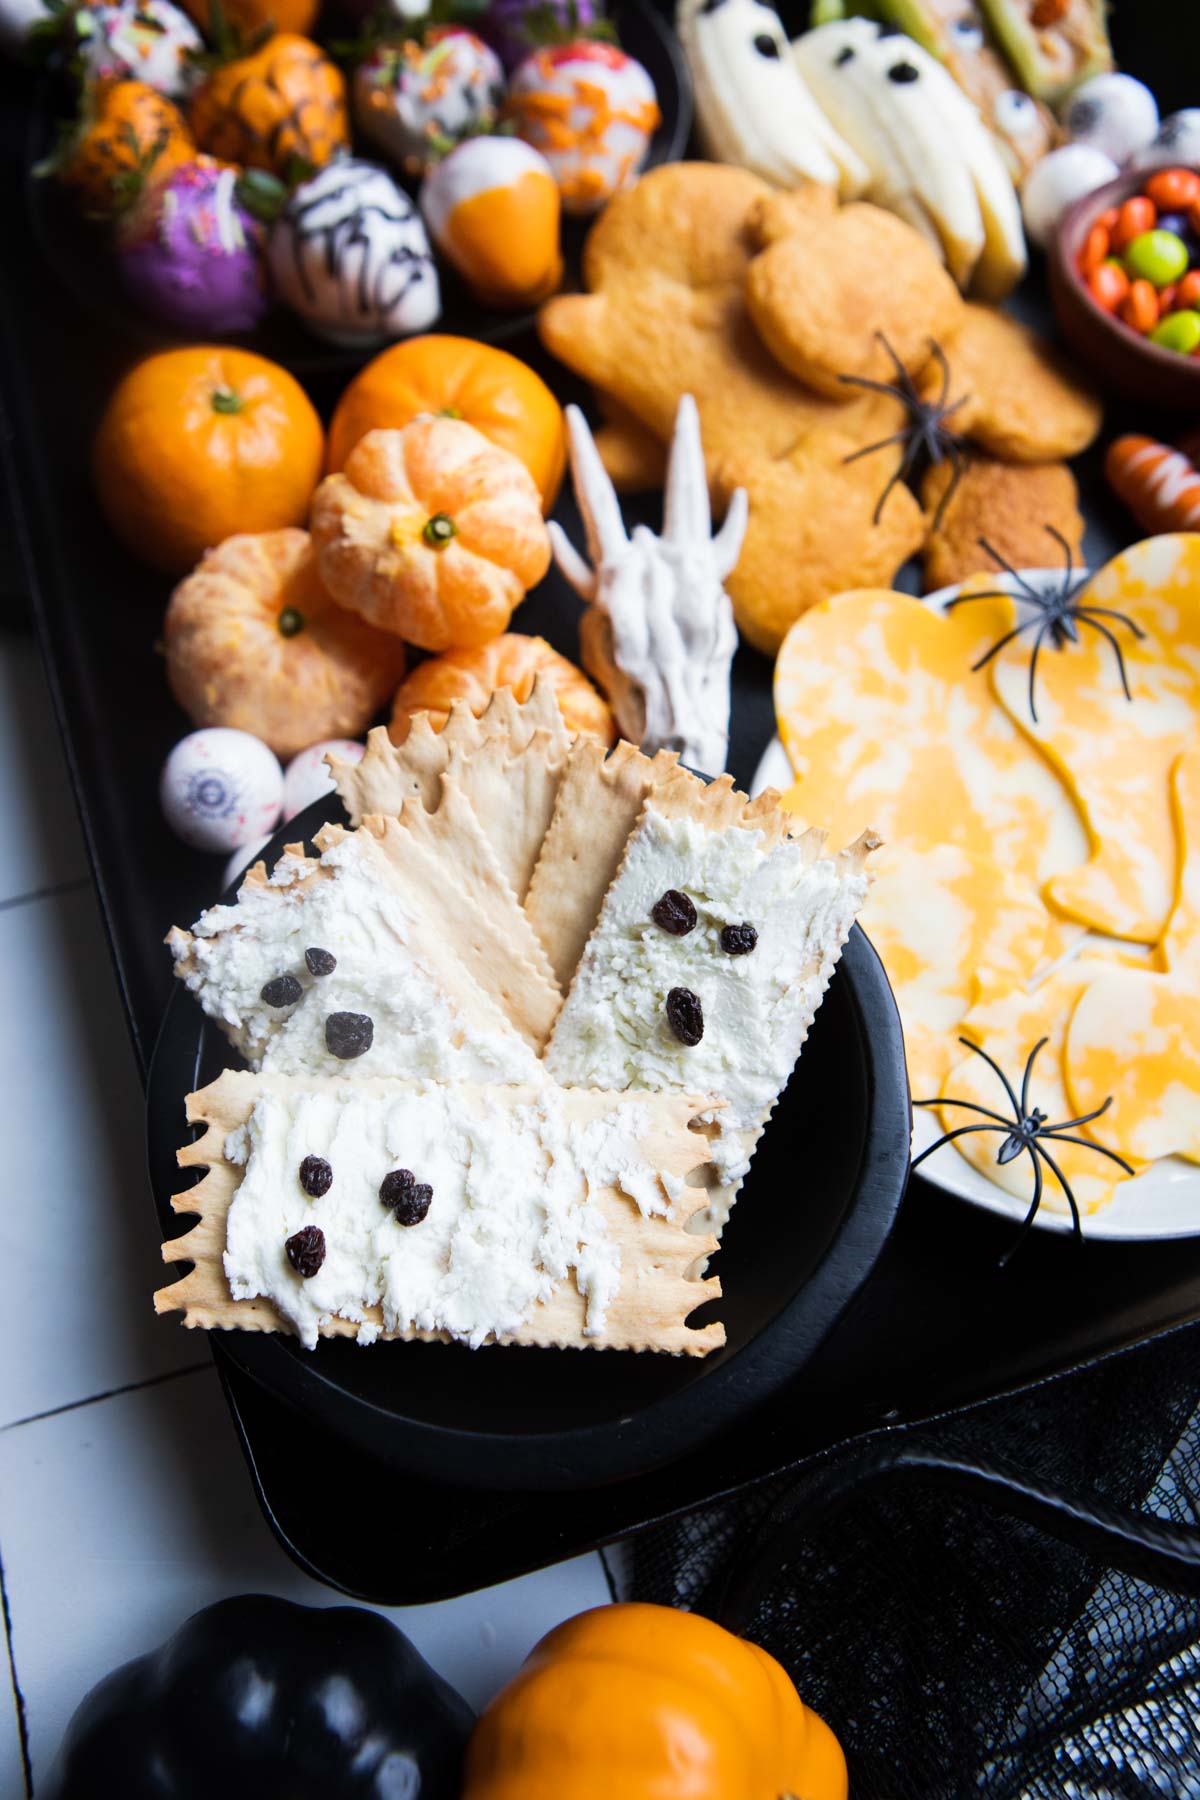 goat cheese spread crackers with currants for eyes and mouth to look like a ghost